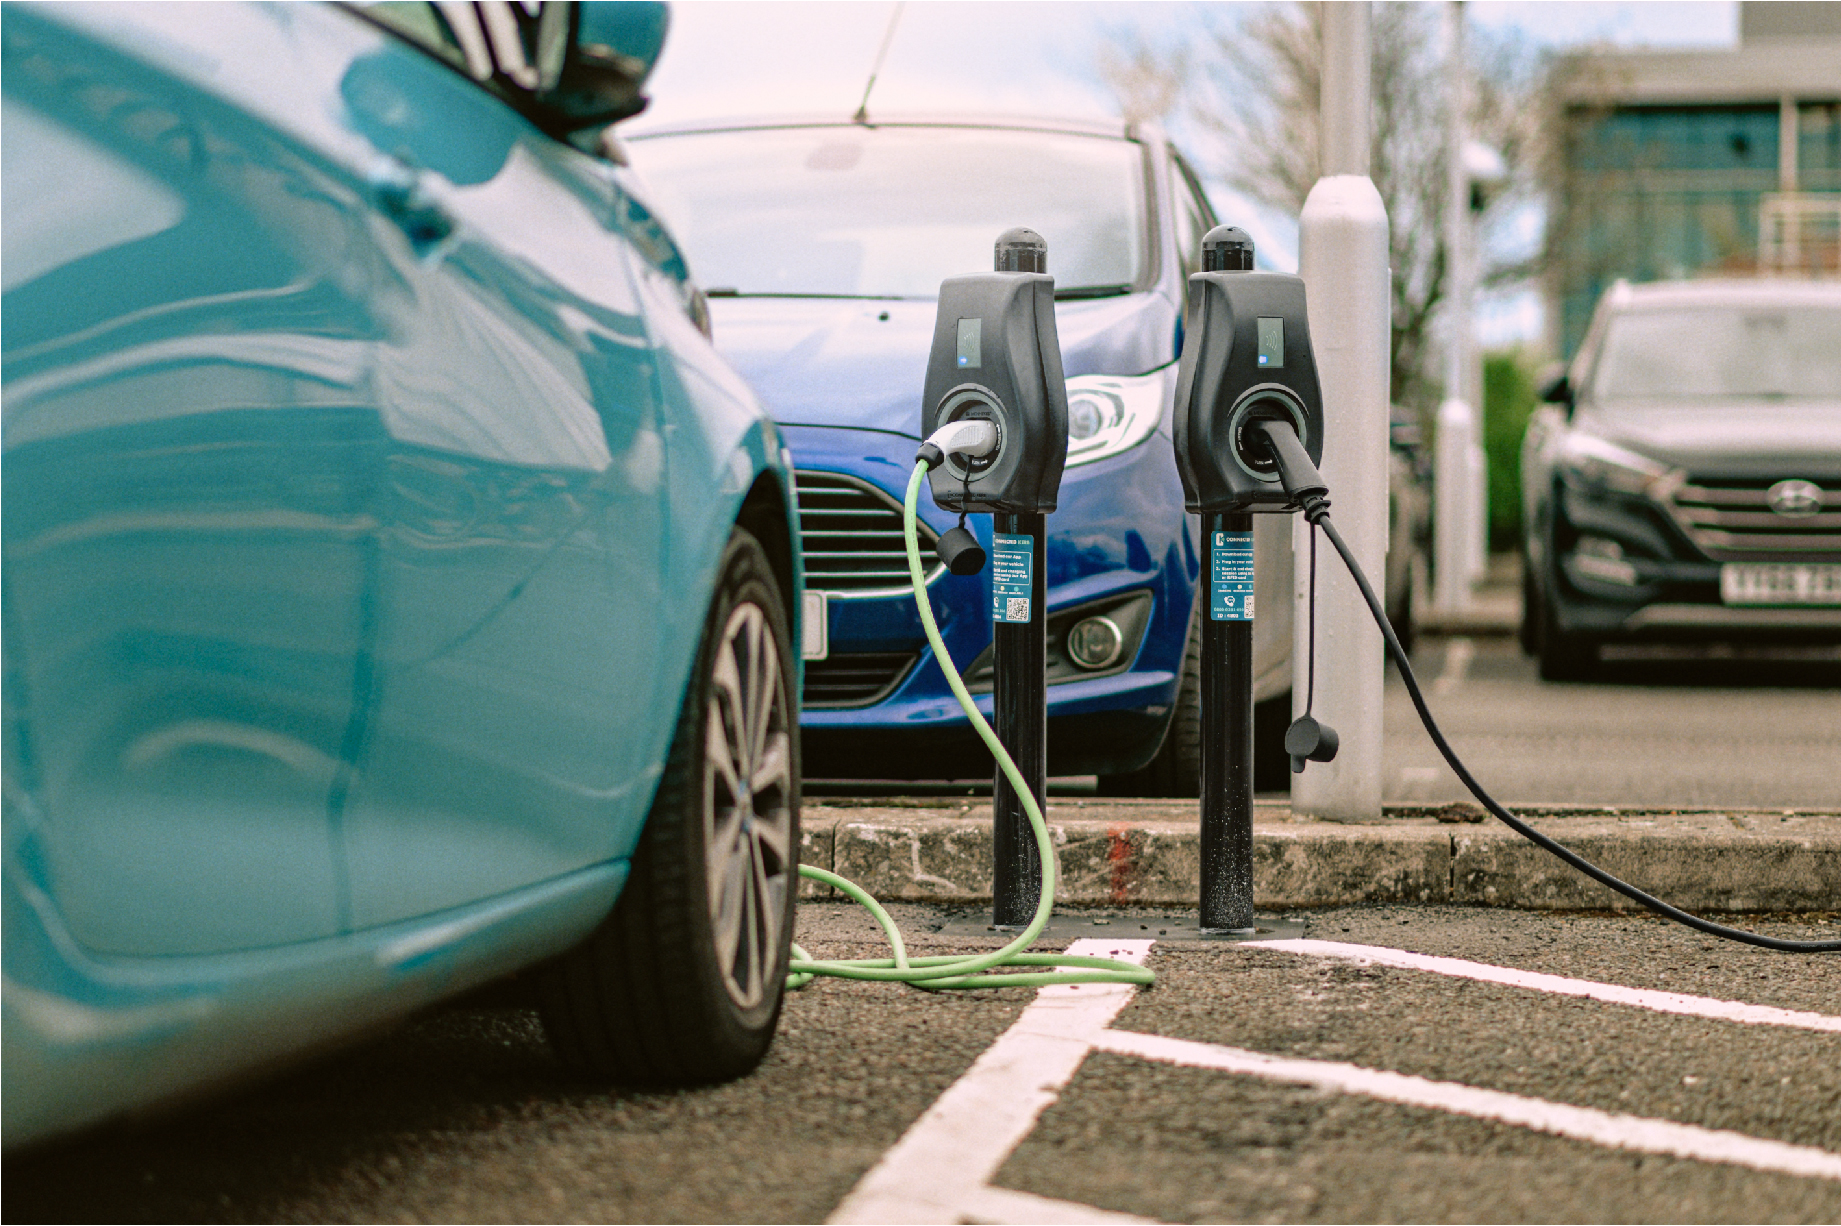 image shows two cars plugged into EV chargepoints